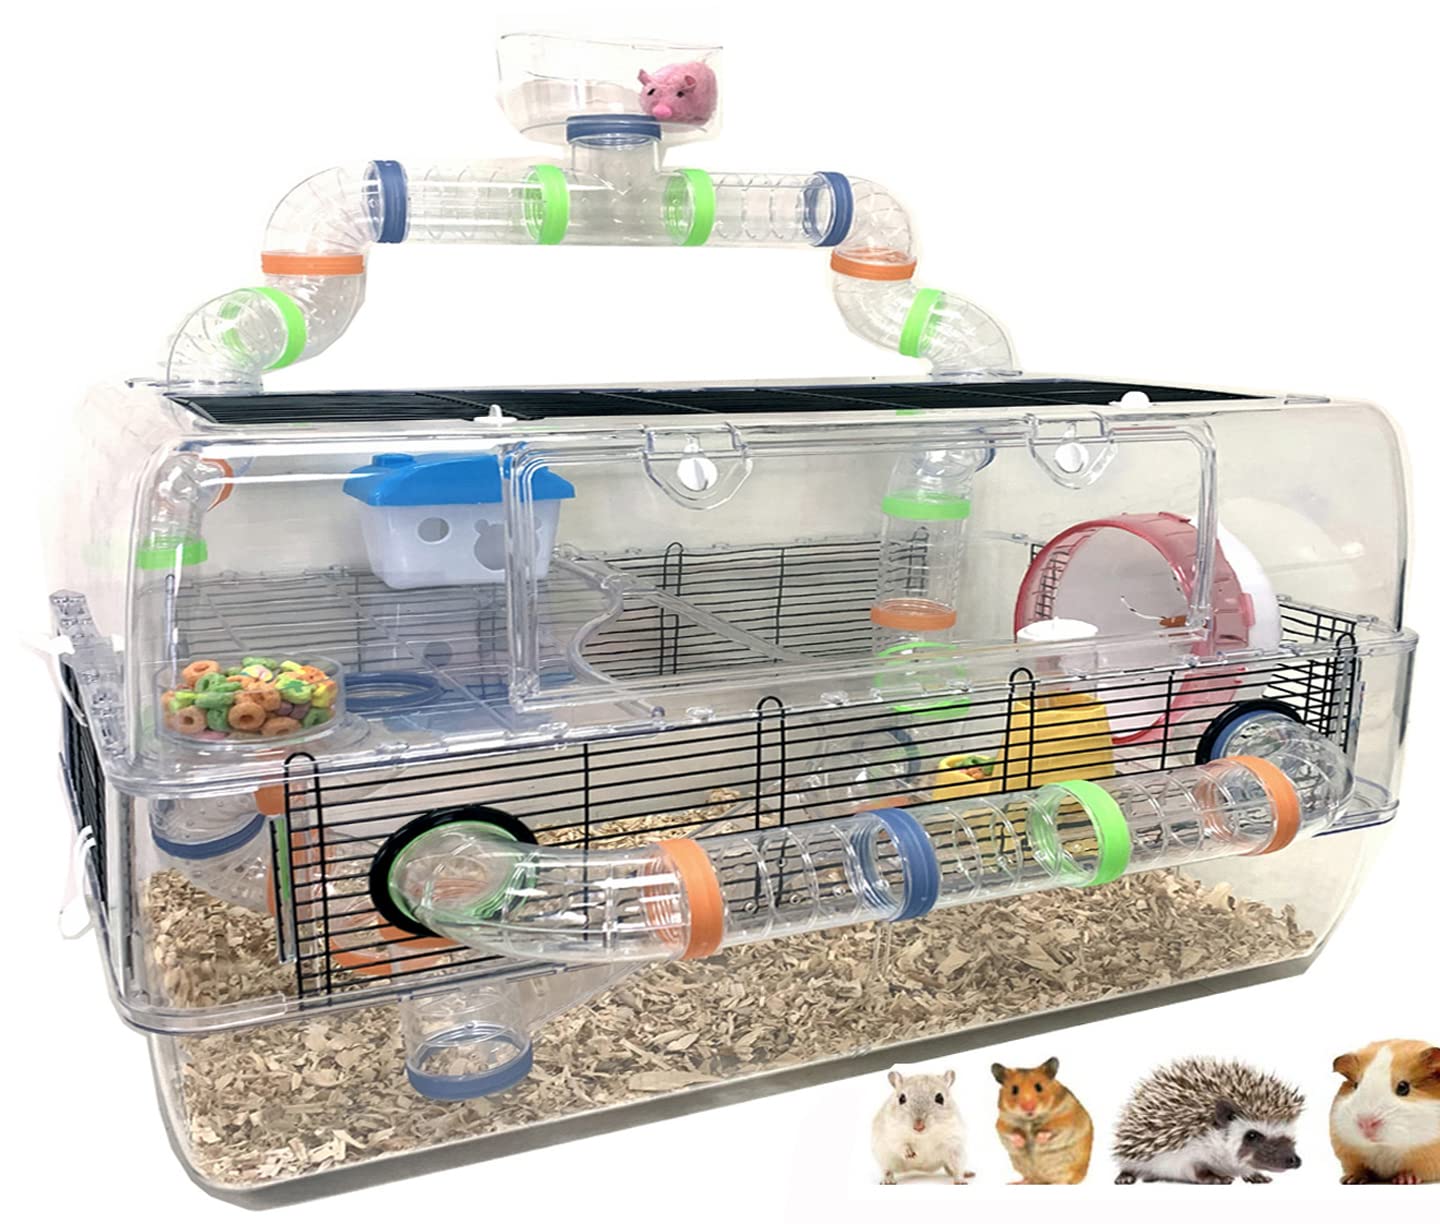 Variety of hamster cages in different sizes and designs